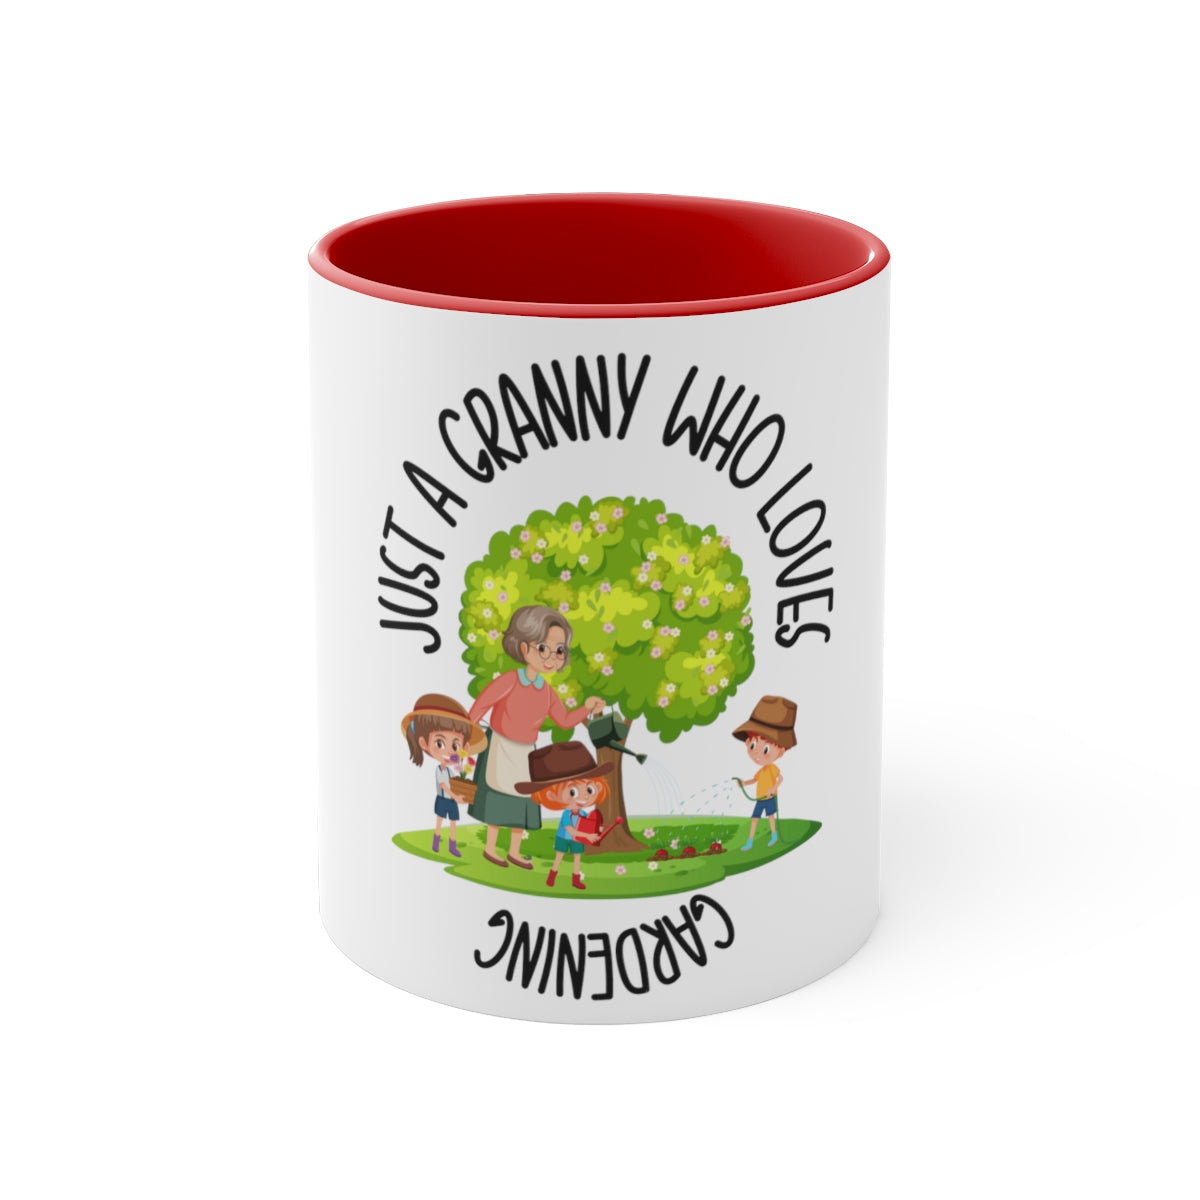 Granny Gift Just A Granny Who Loves Gardening Gift For Granny Coffee Mug or Tea Cup 11 ounce Gardener Gift